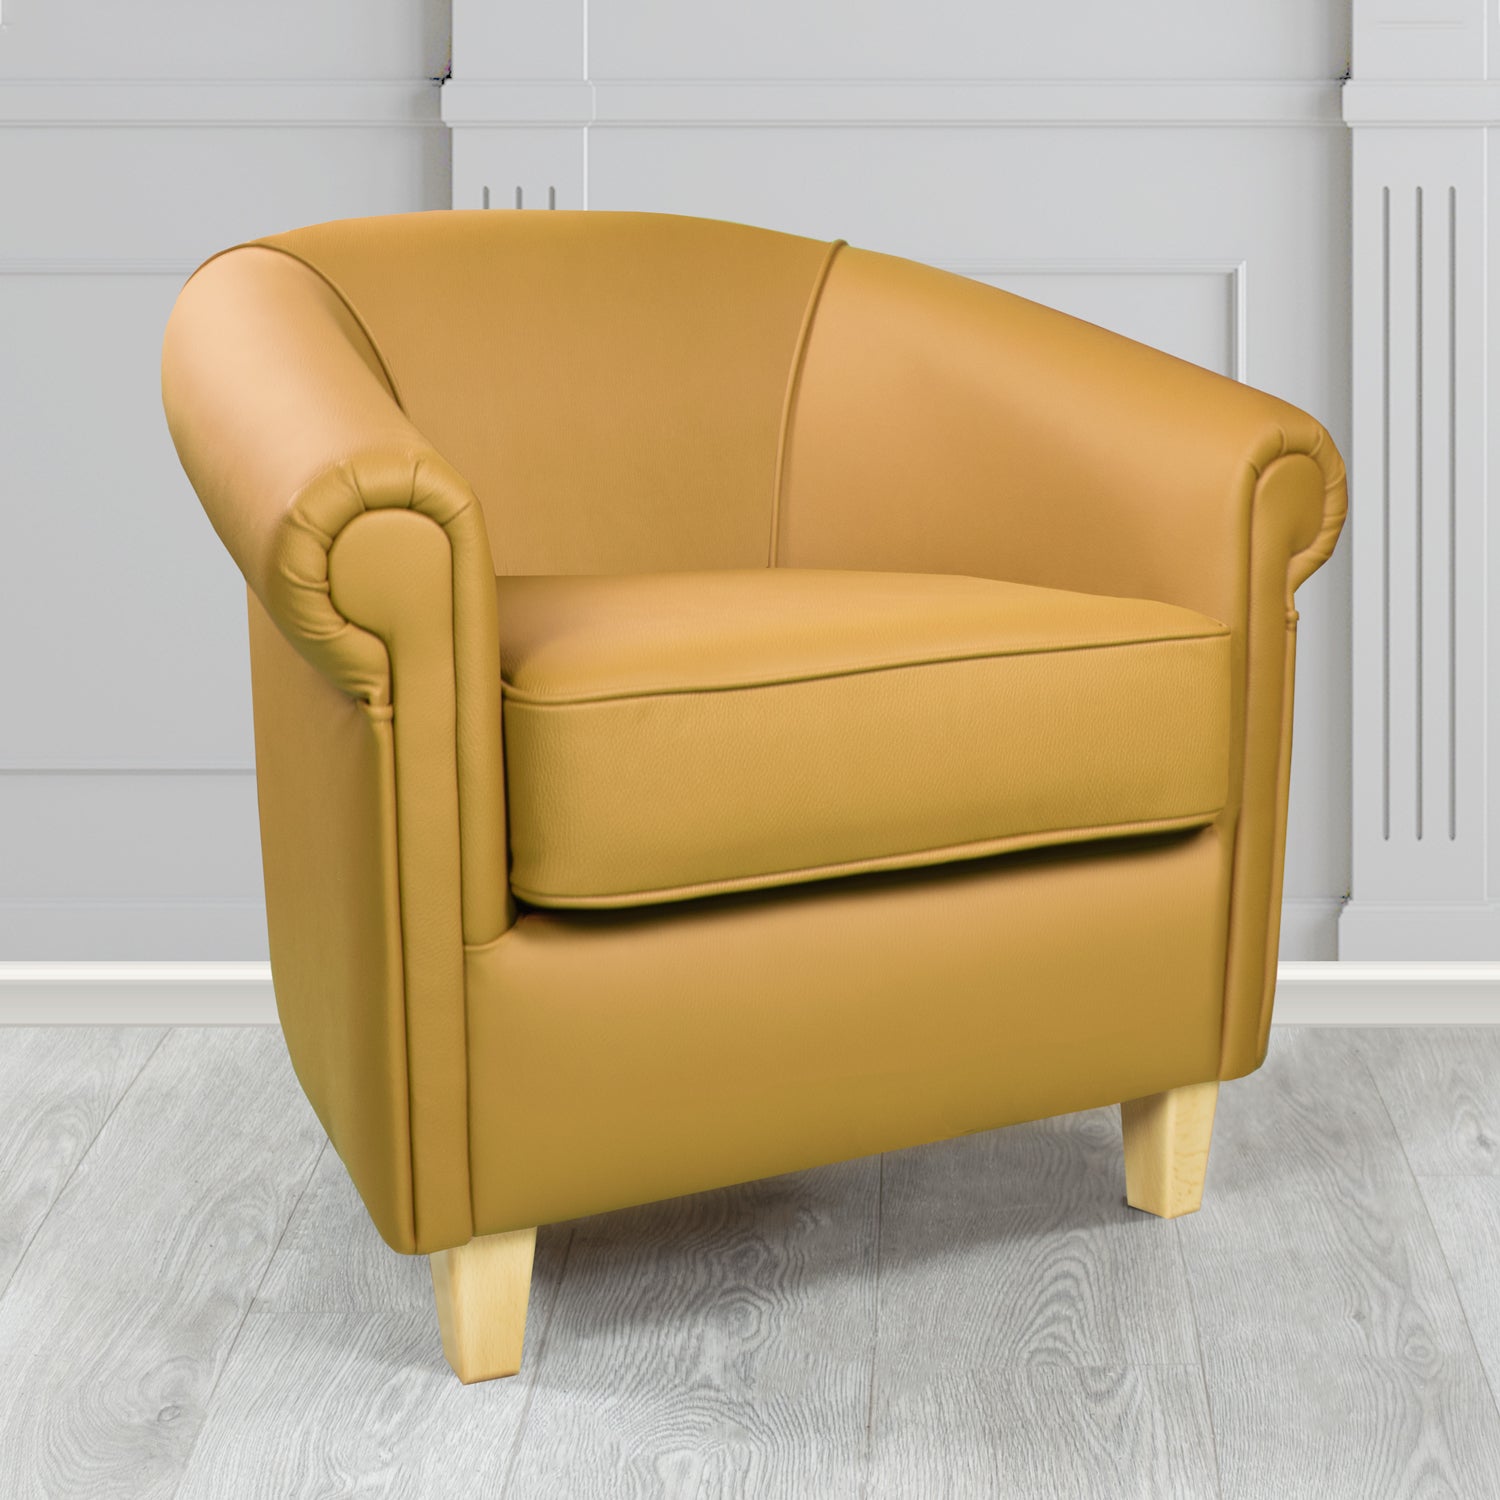 Siena Tub Chair in Crib 5 Shelly Parchment Genuine Leather - The Tub Chair Shop